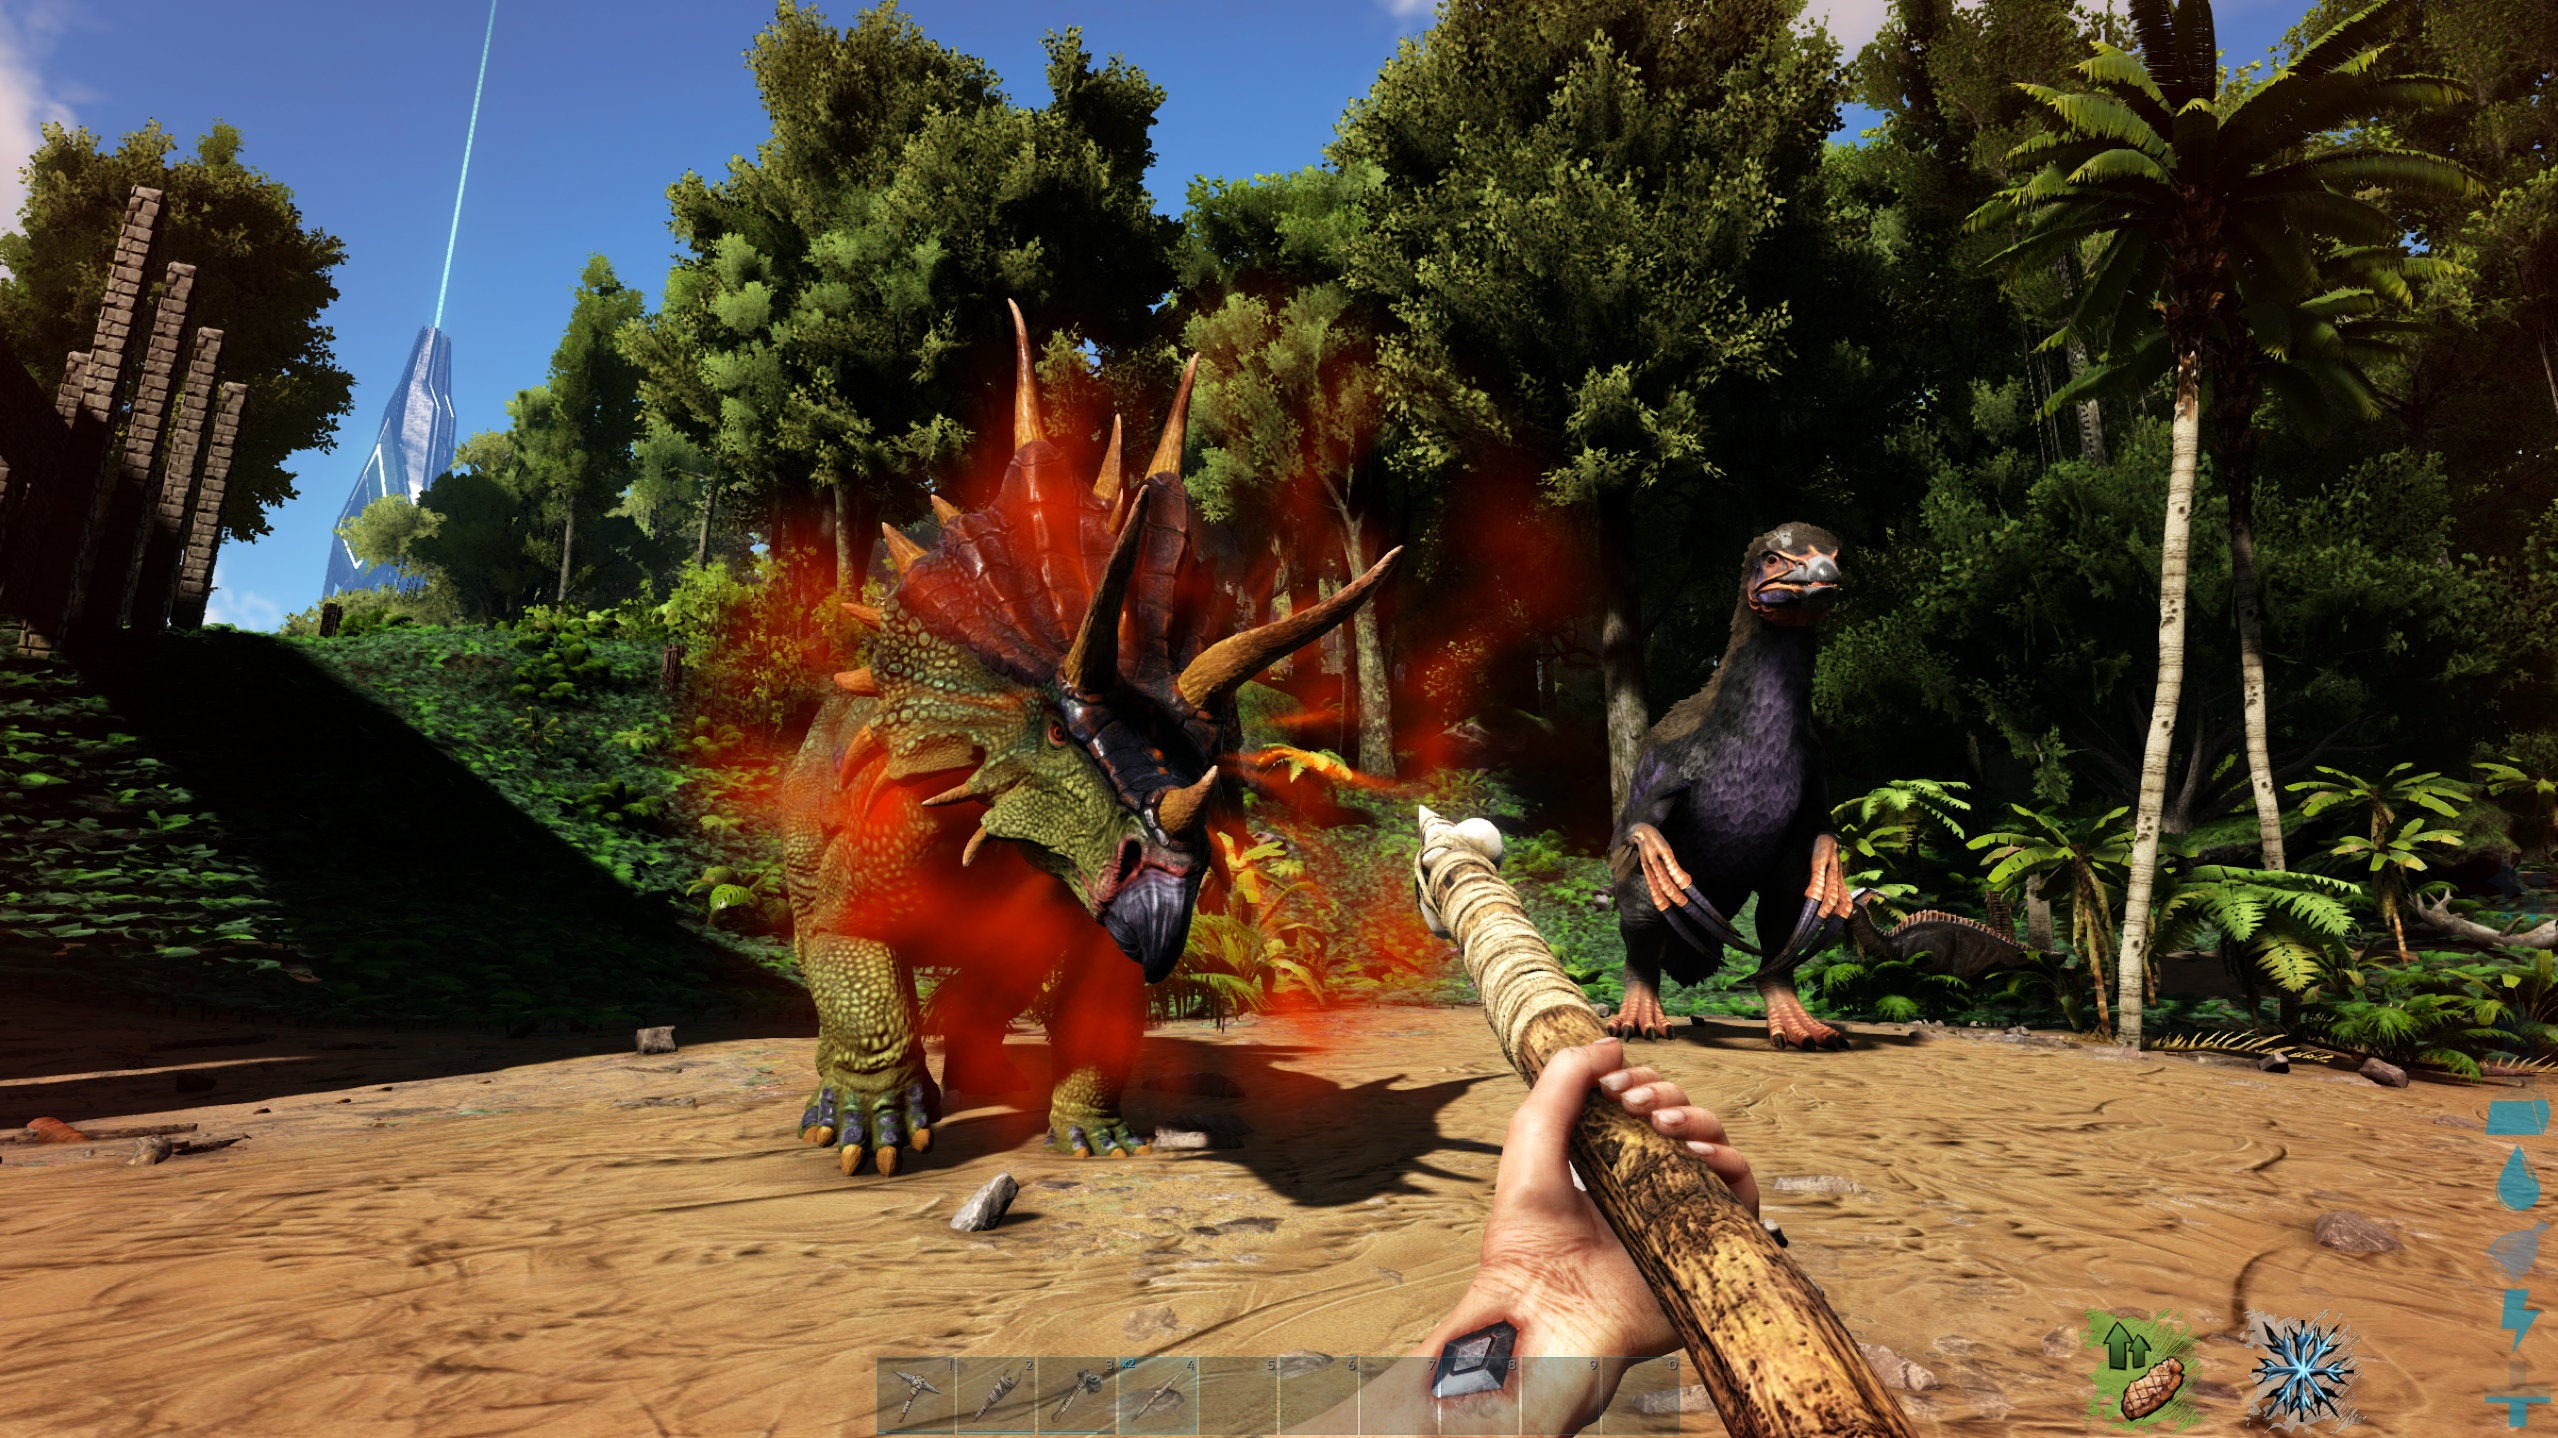 Ark: Survival Evolved is free on the Epic Games Store | Rock Paper